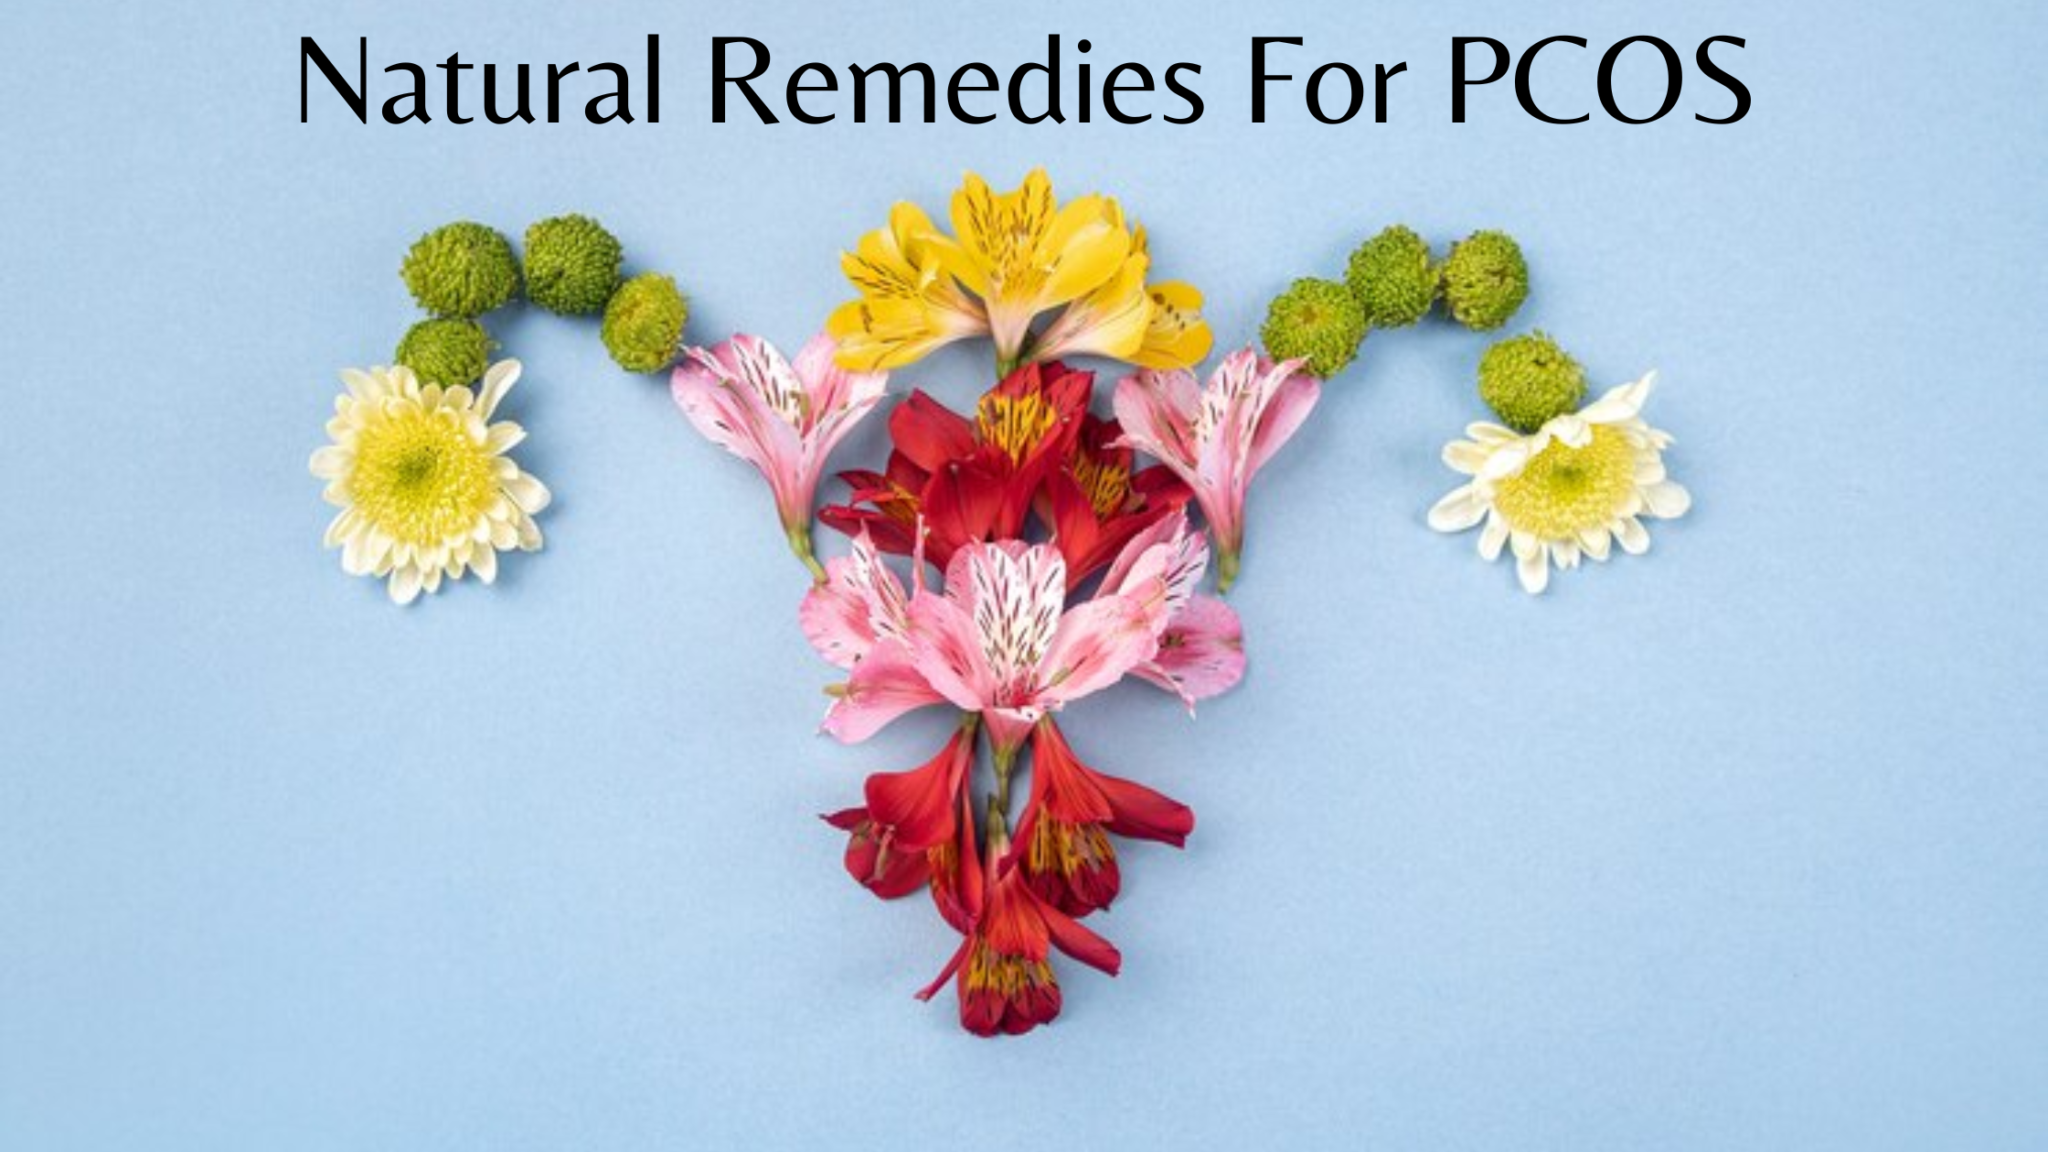 What are the natural remedies for PCOS?